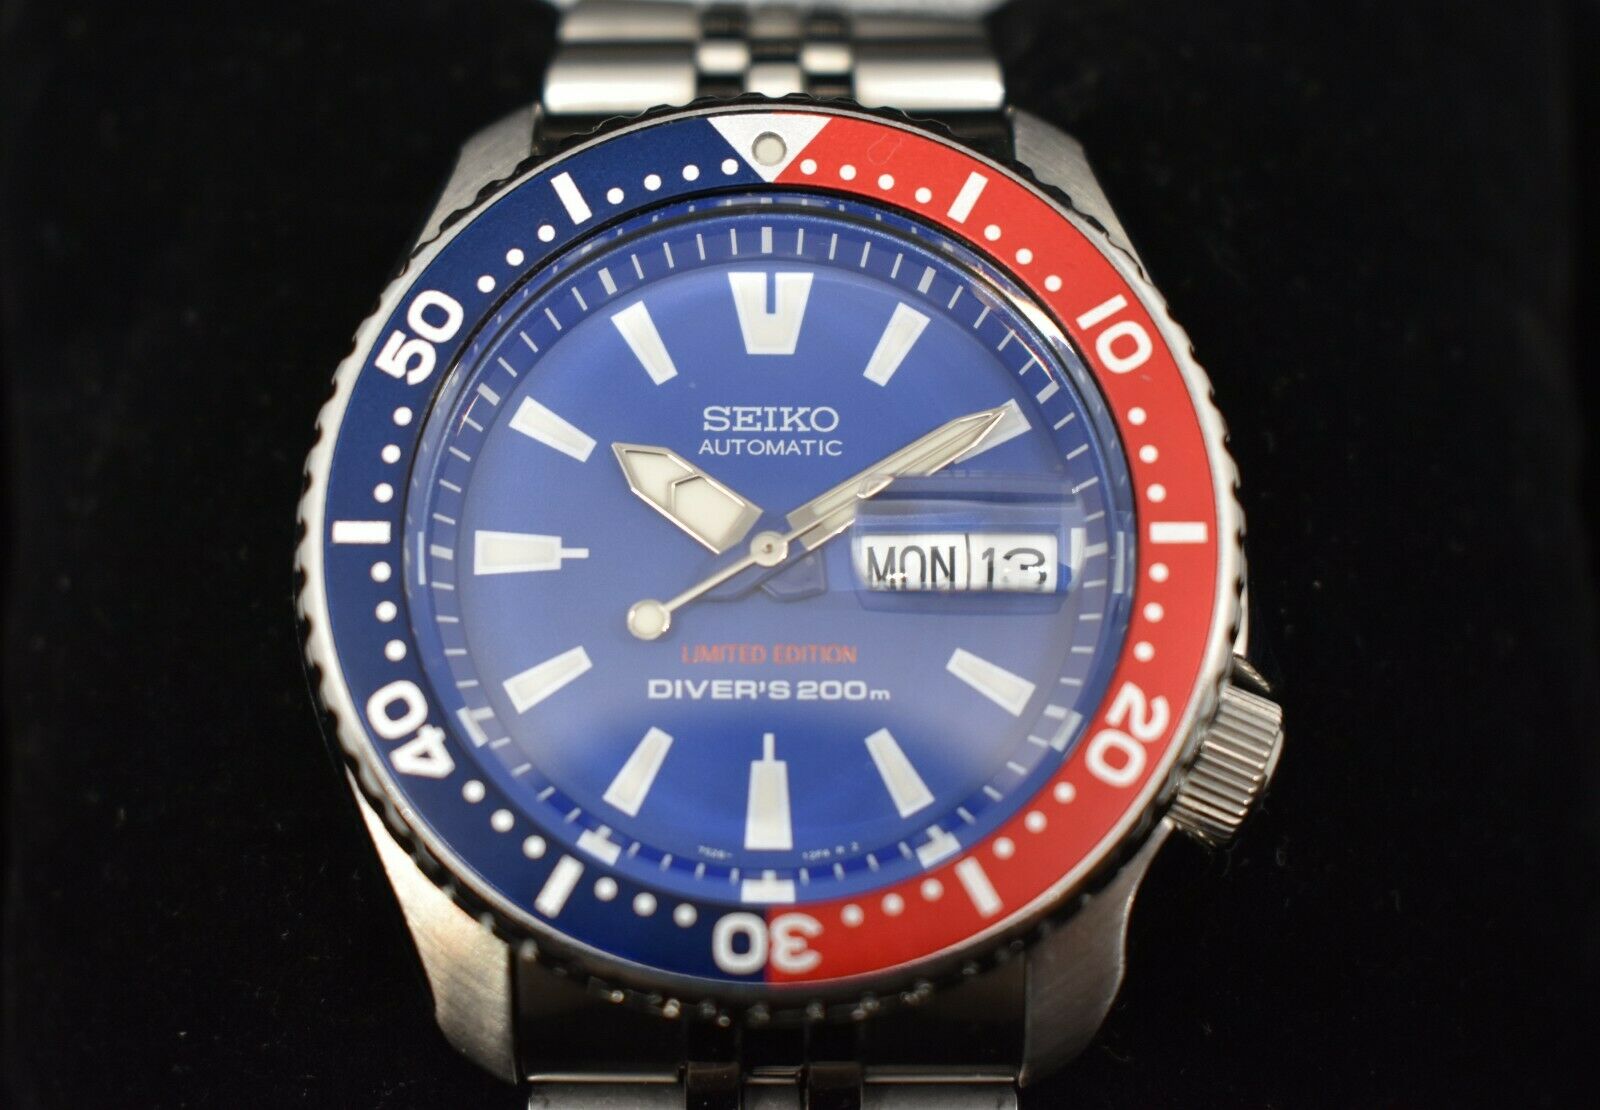 Limited Edition Seiko SKX 200M Automatic Dive Watch SKXA065 | WatchCharts